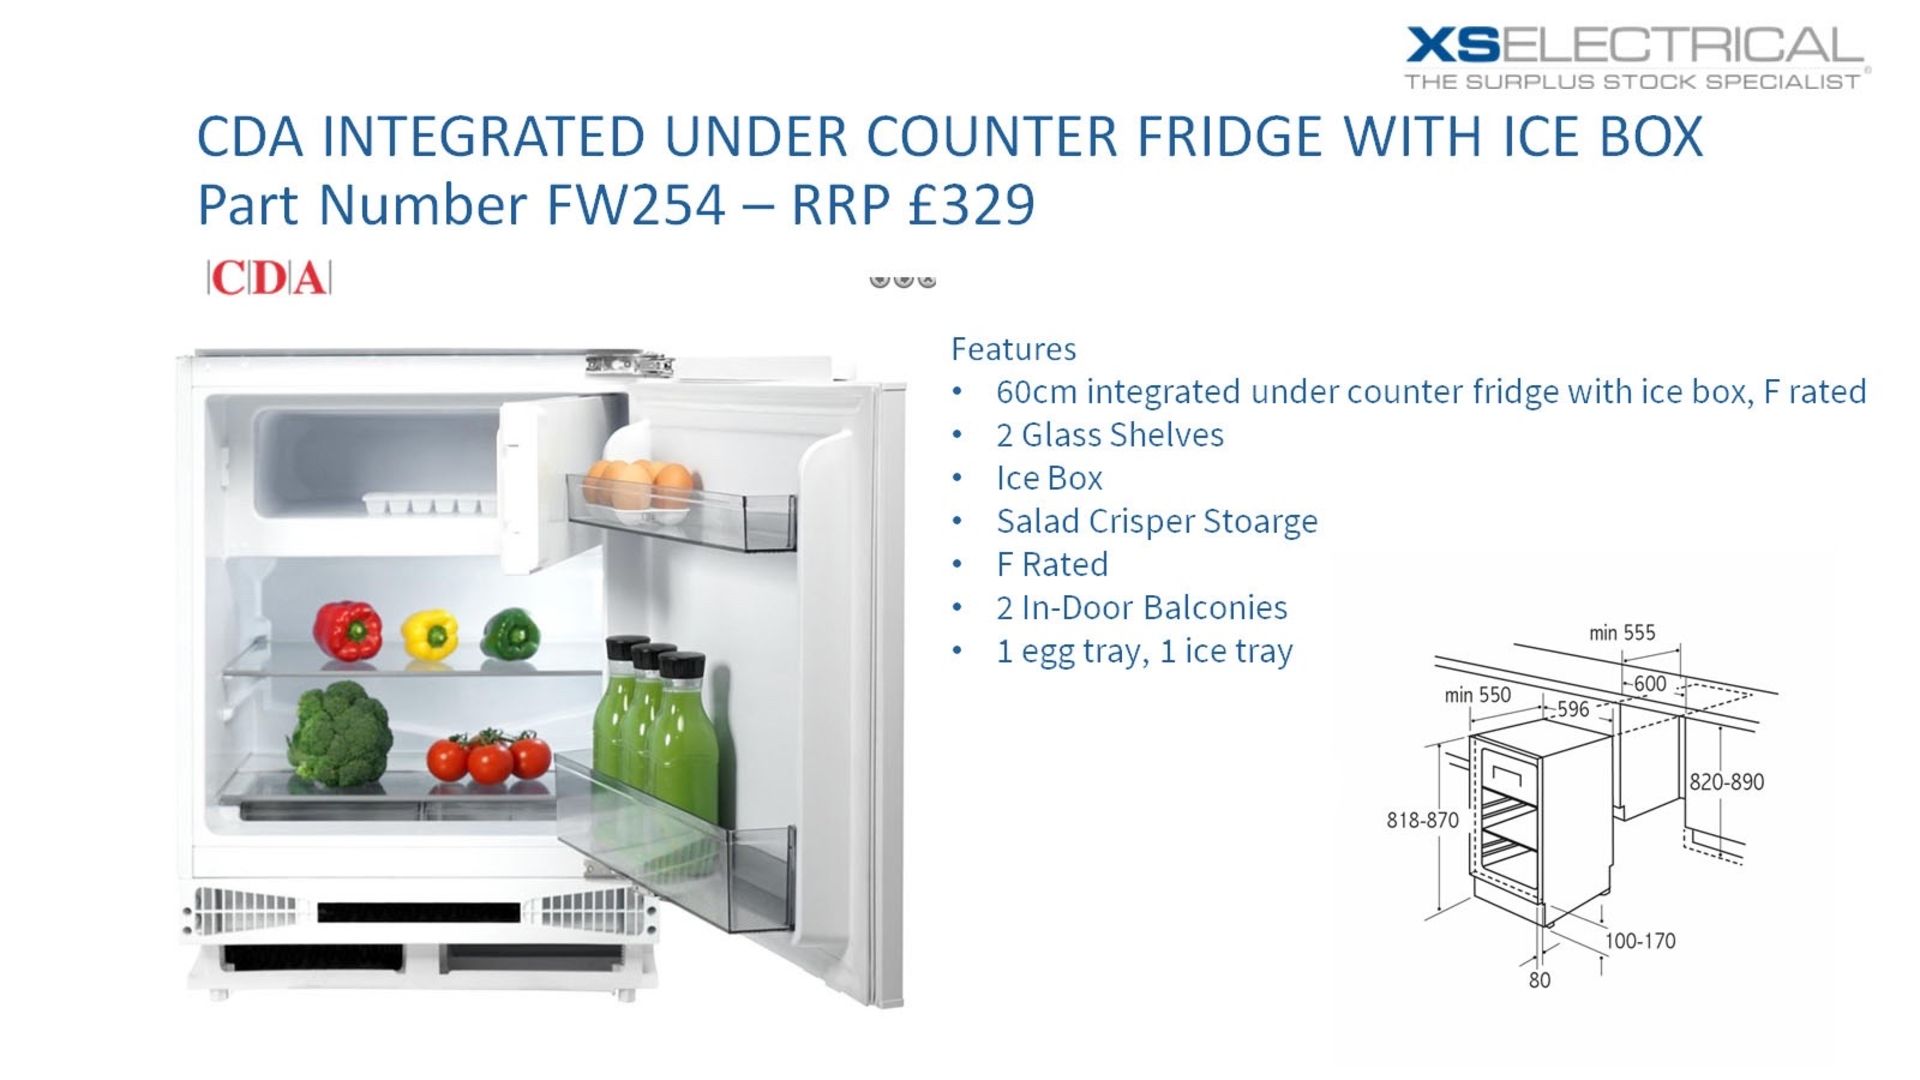 CDA Intergrated Under Counter Fridge with Ice Box - Part Number FW254 - RRP 329